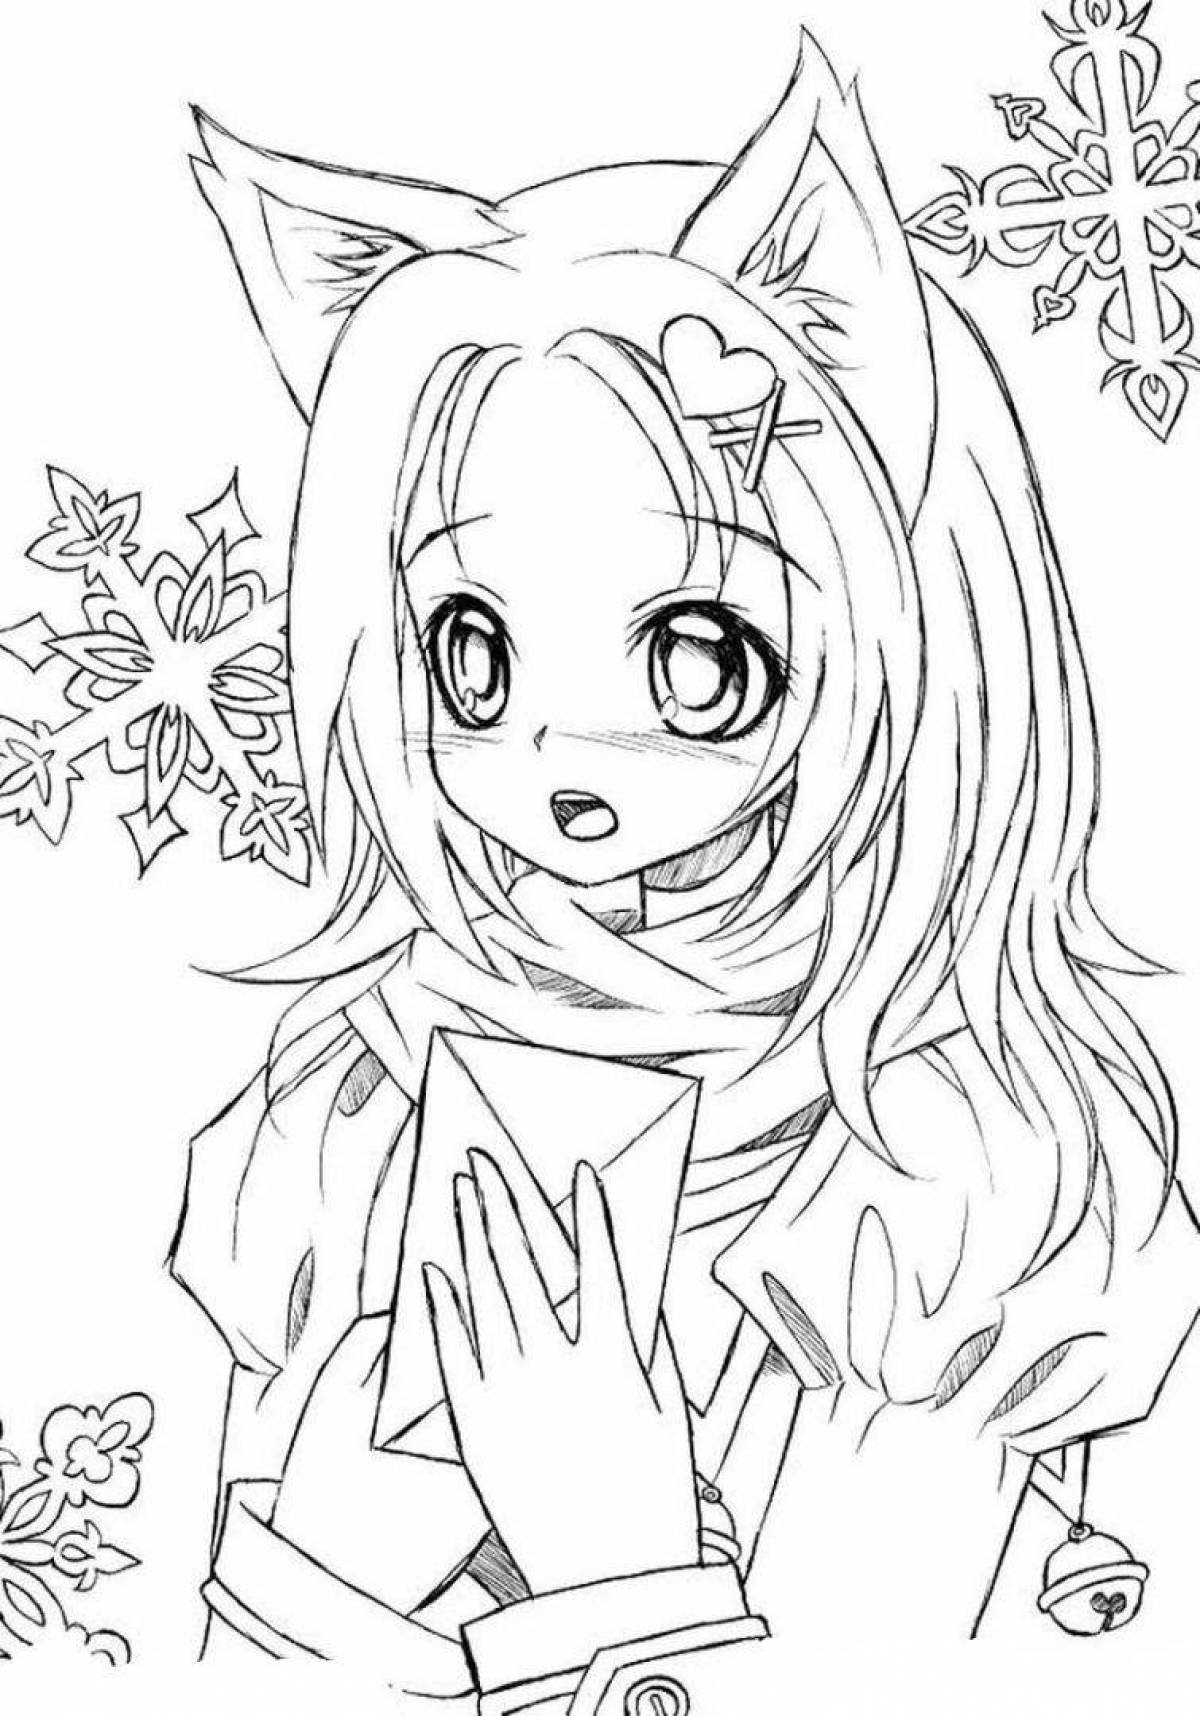 Colorful anime kitty coloring page